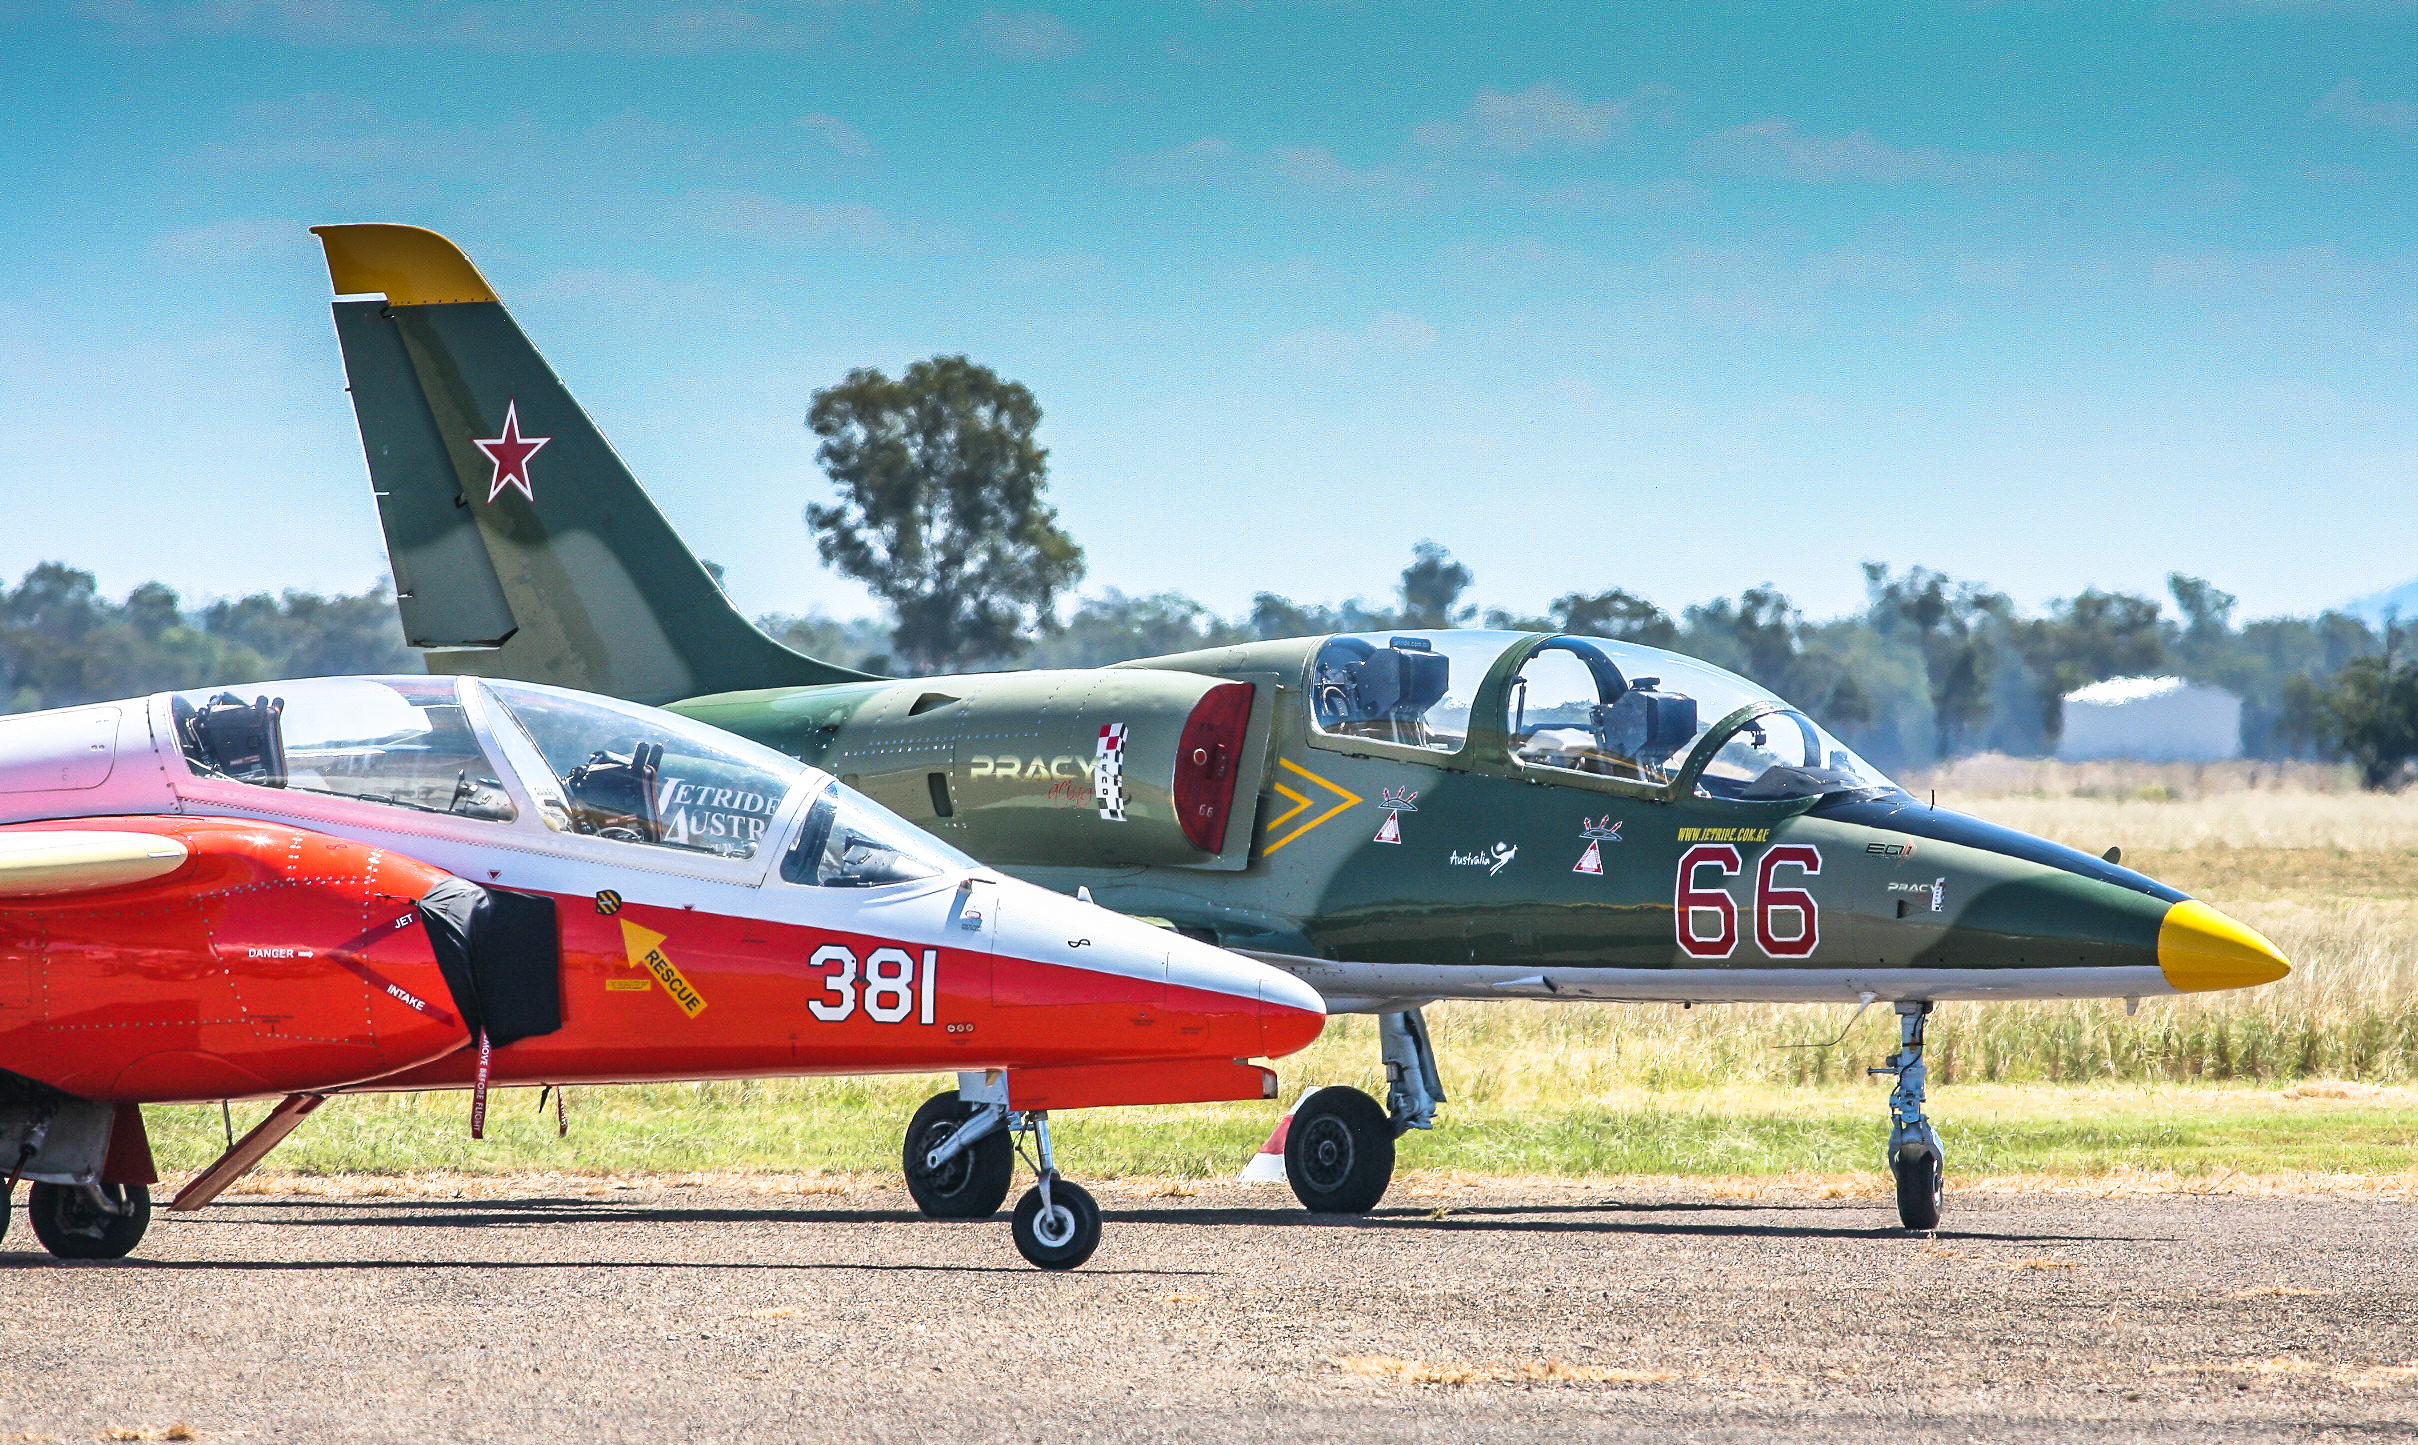 The SIAI-Marchetti (forground) and L-39. David Gale flew them both ably over the course of the show. (photo by Phil Buckley)